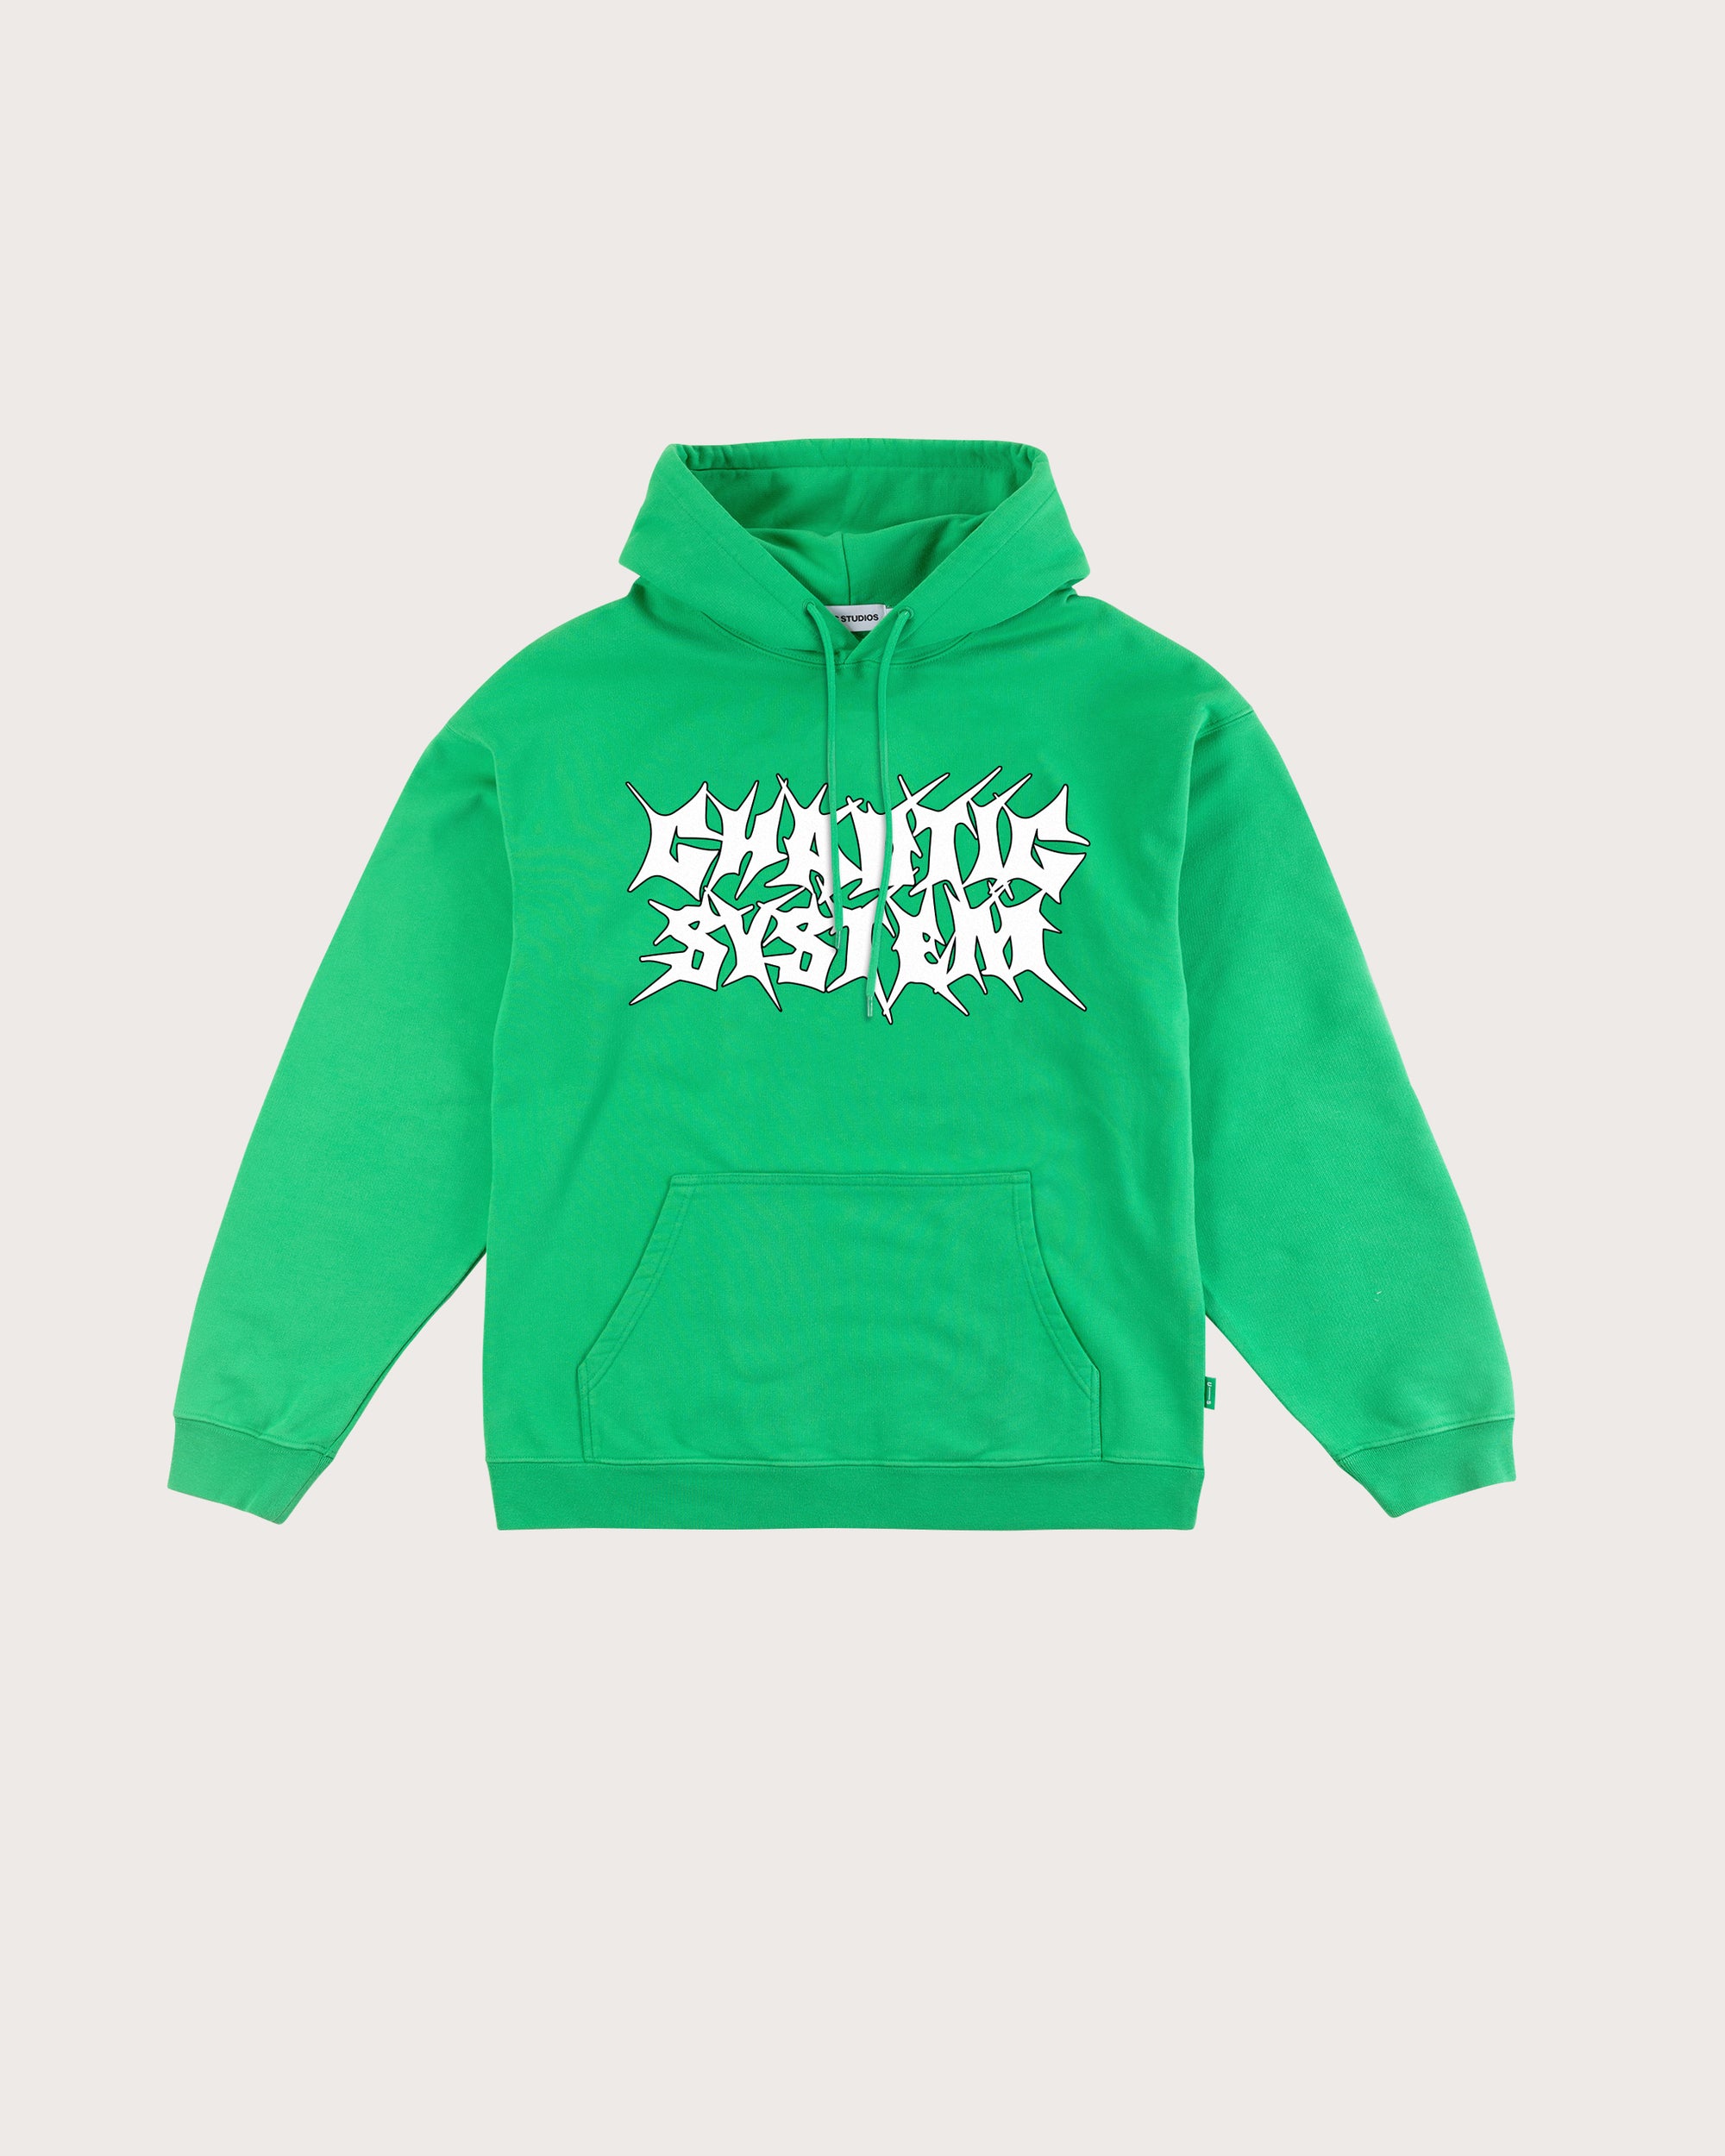 Chaotic System Hoodie Green